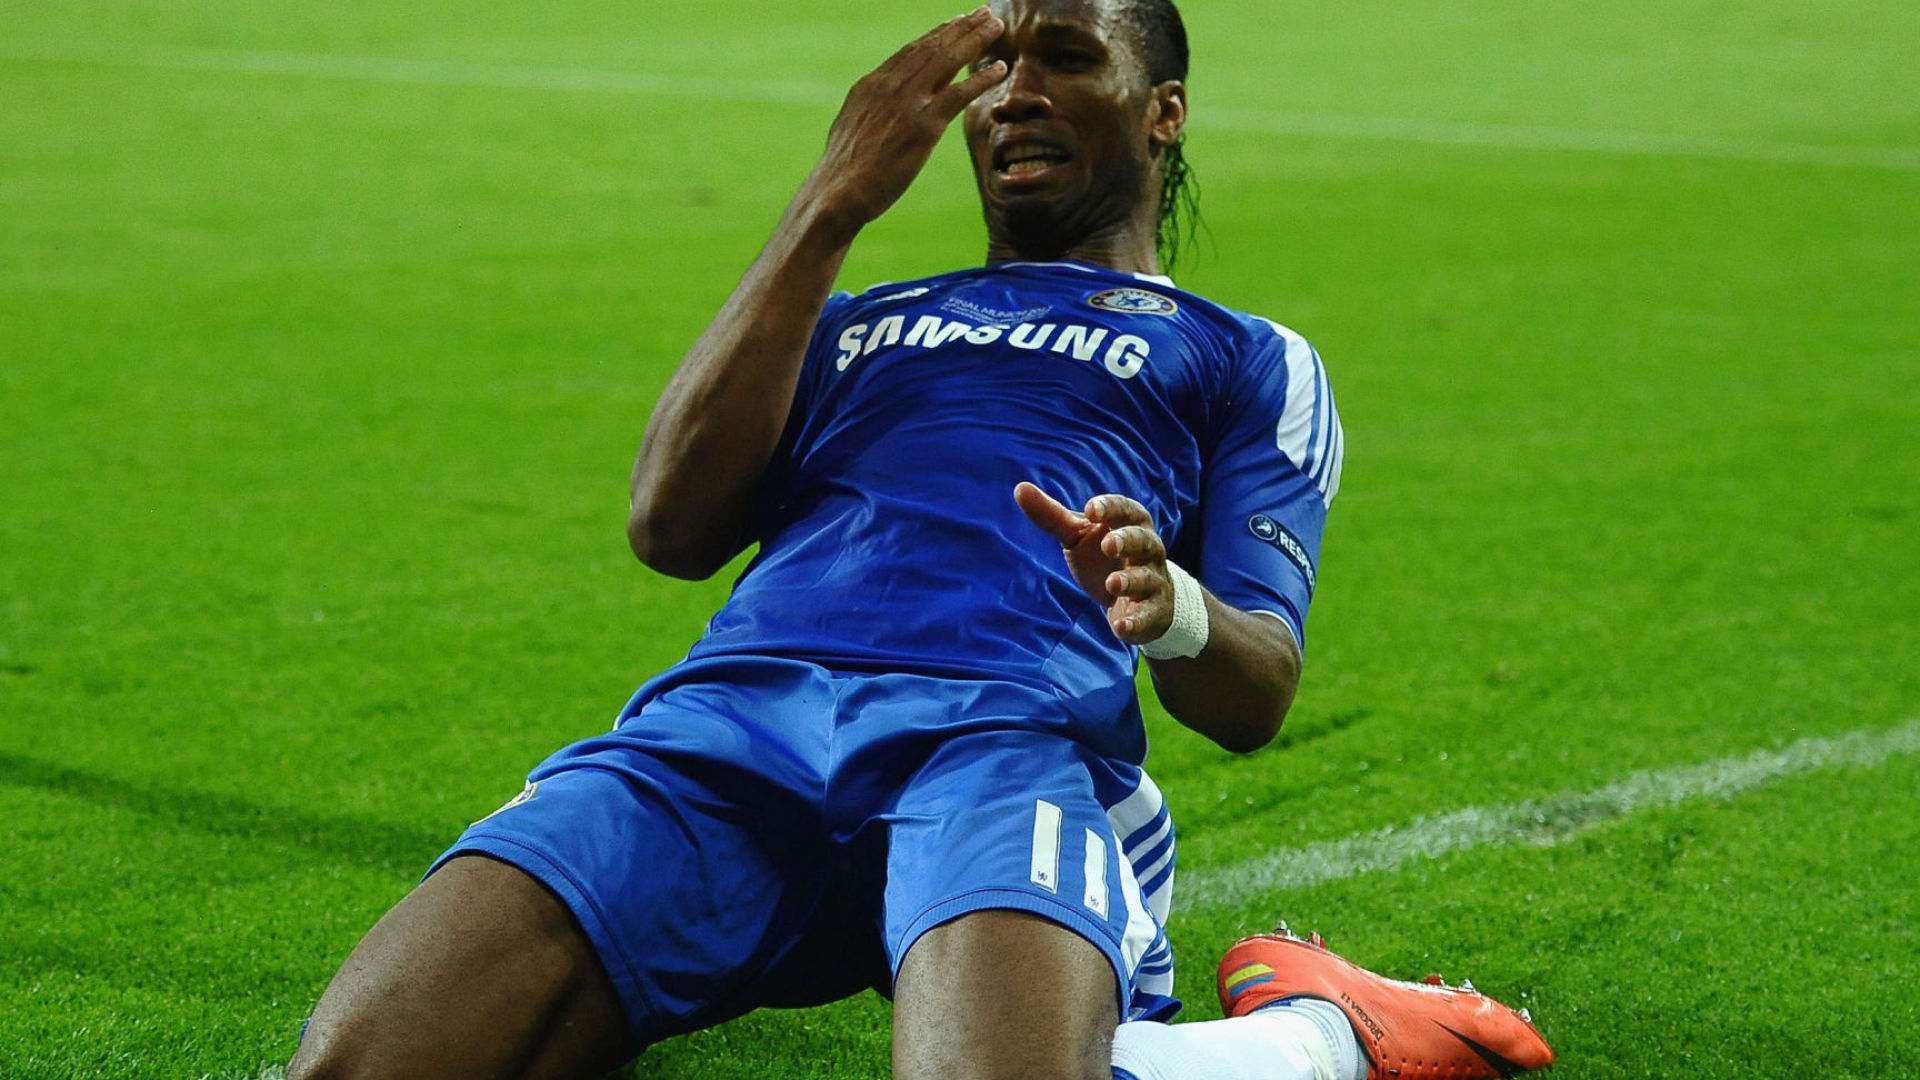 Drogba: Inducted into the Premier League Hall of Fame, 2022. 1920x1080 Full HD Background.